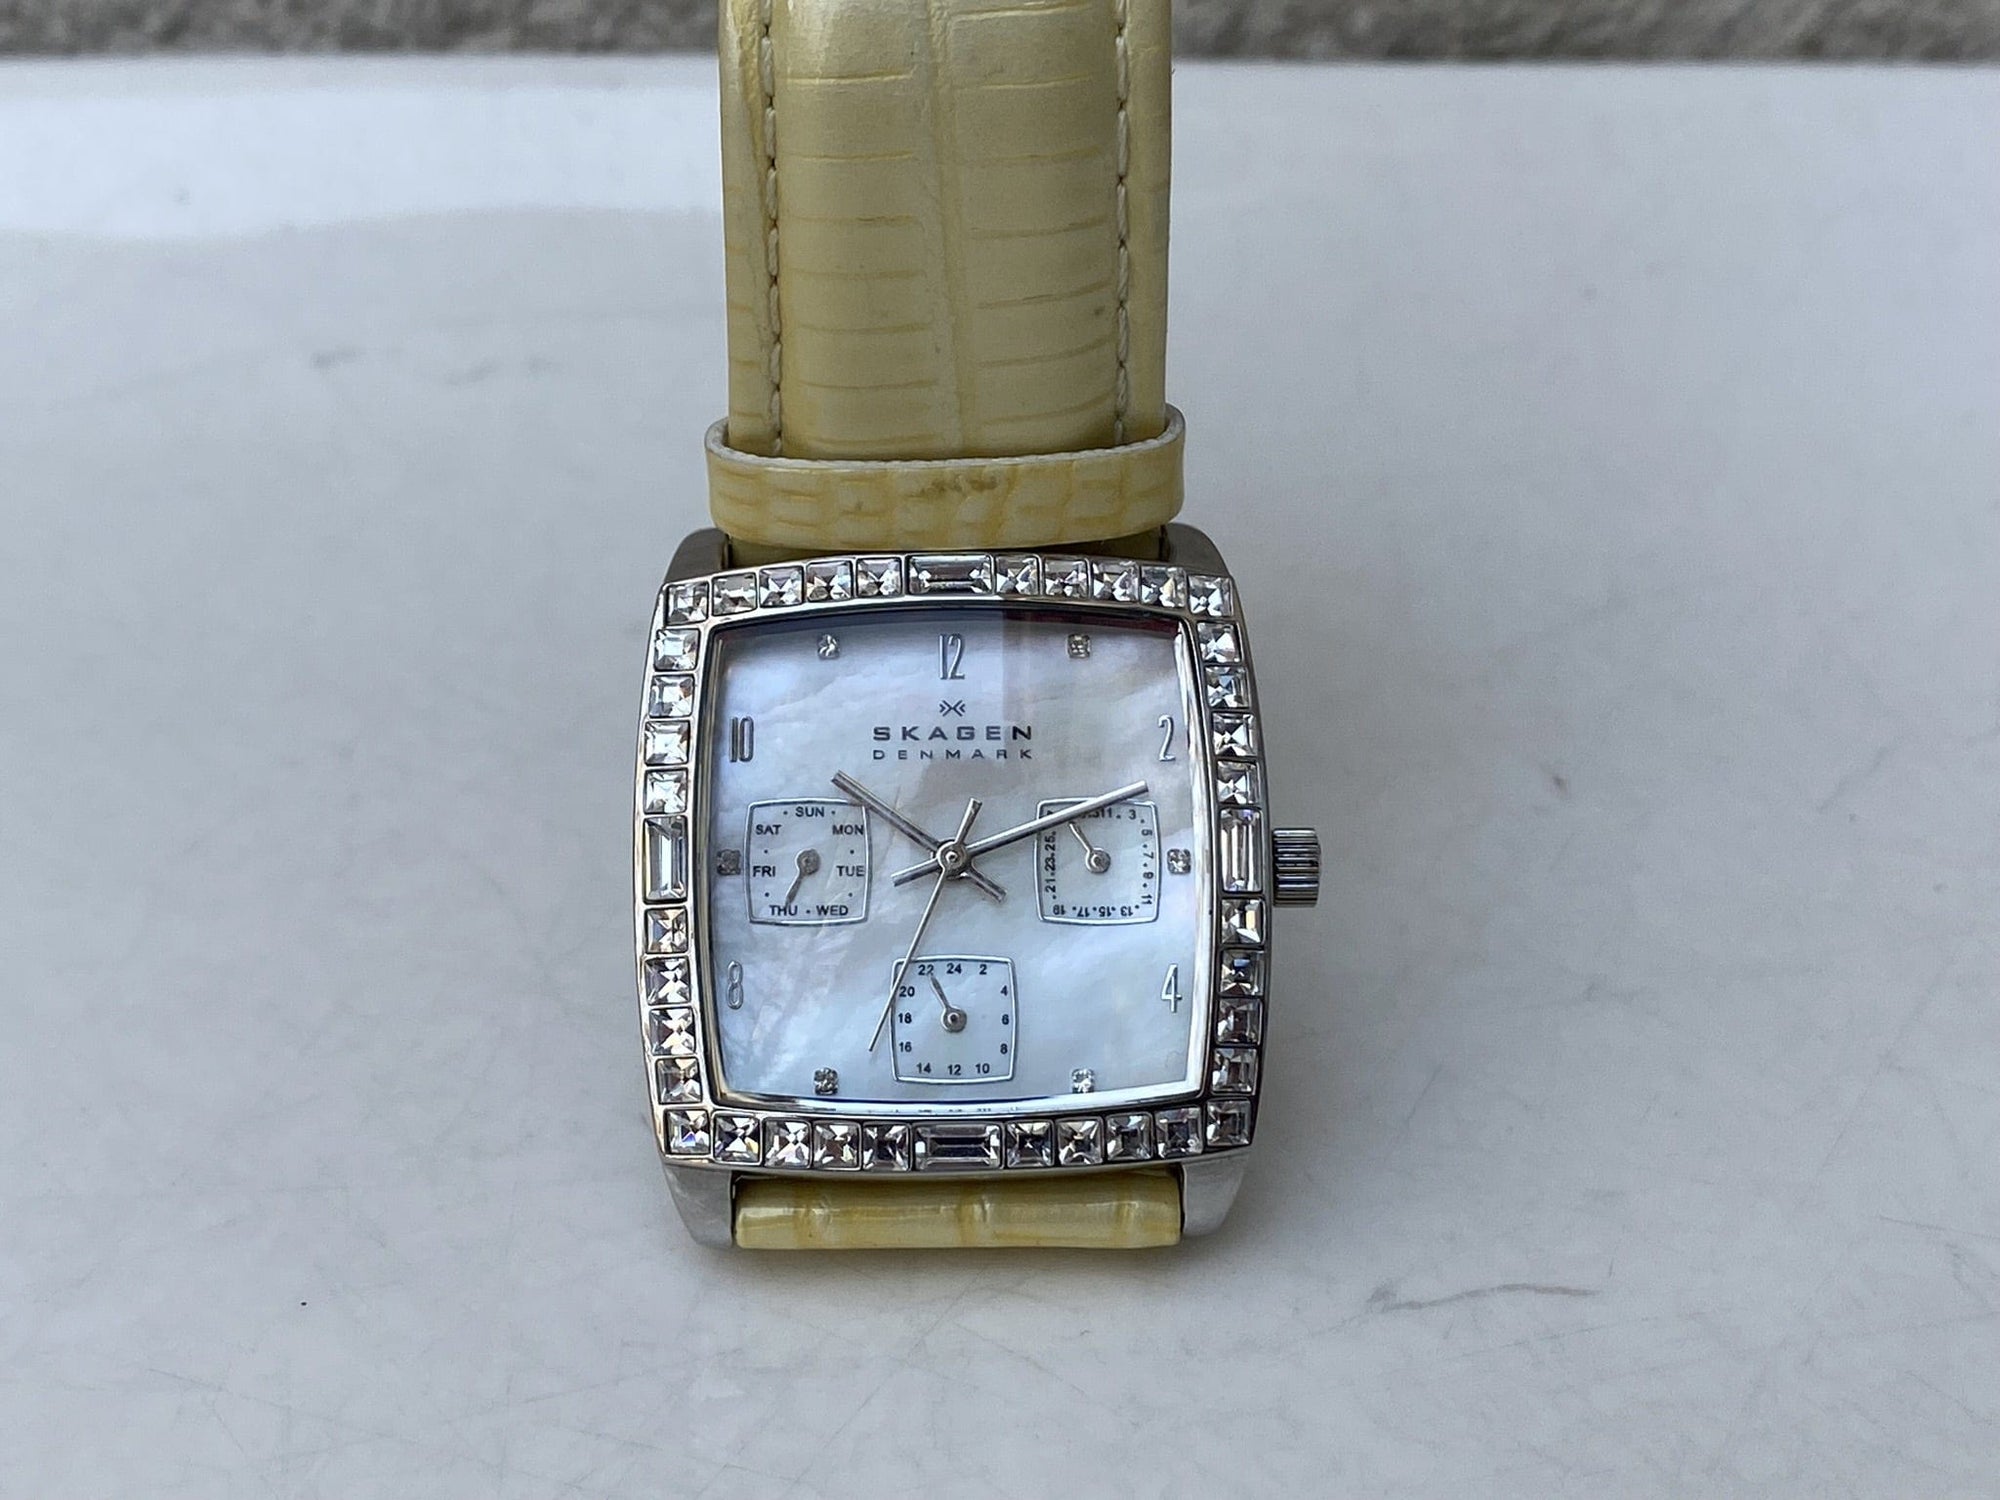 I Like Mike's Mid Century Modern Watch Skagen Large Women's Square Watch, Jeweled Mother of Pearl Dial, Date Calendar, Silver Tone Yellow White Leather Band